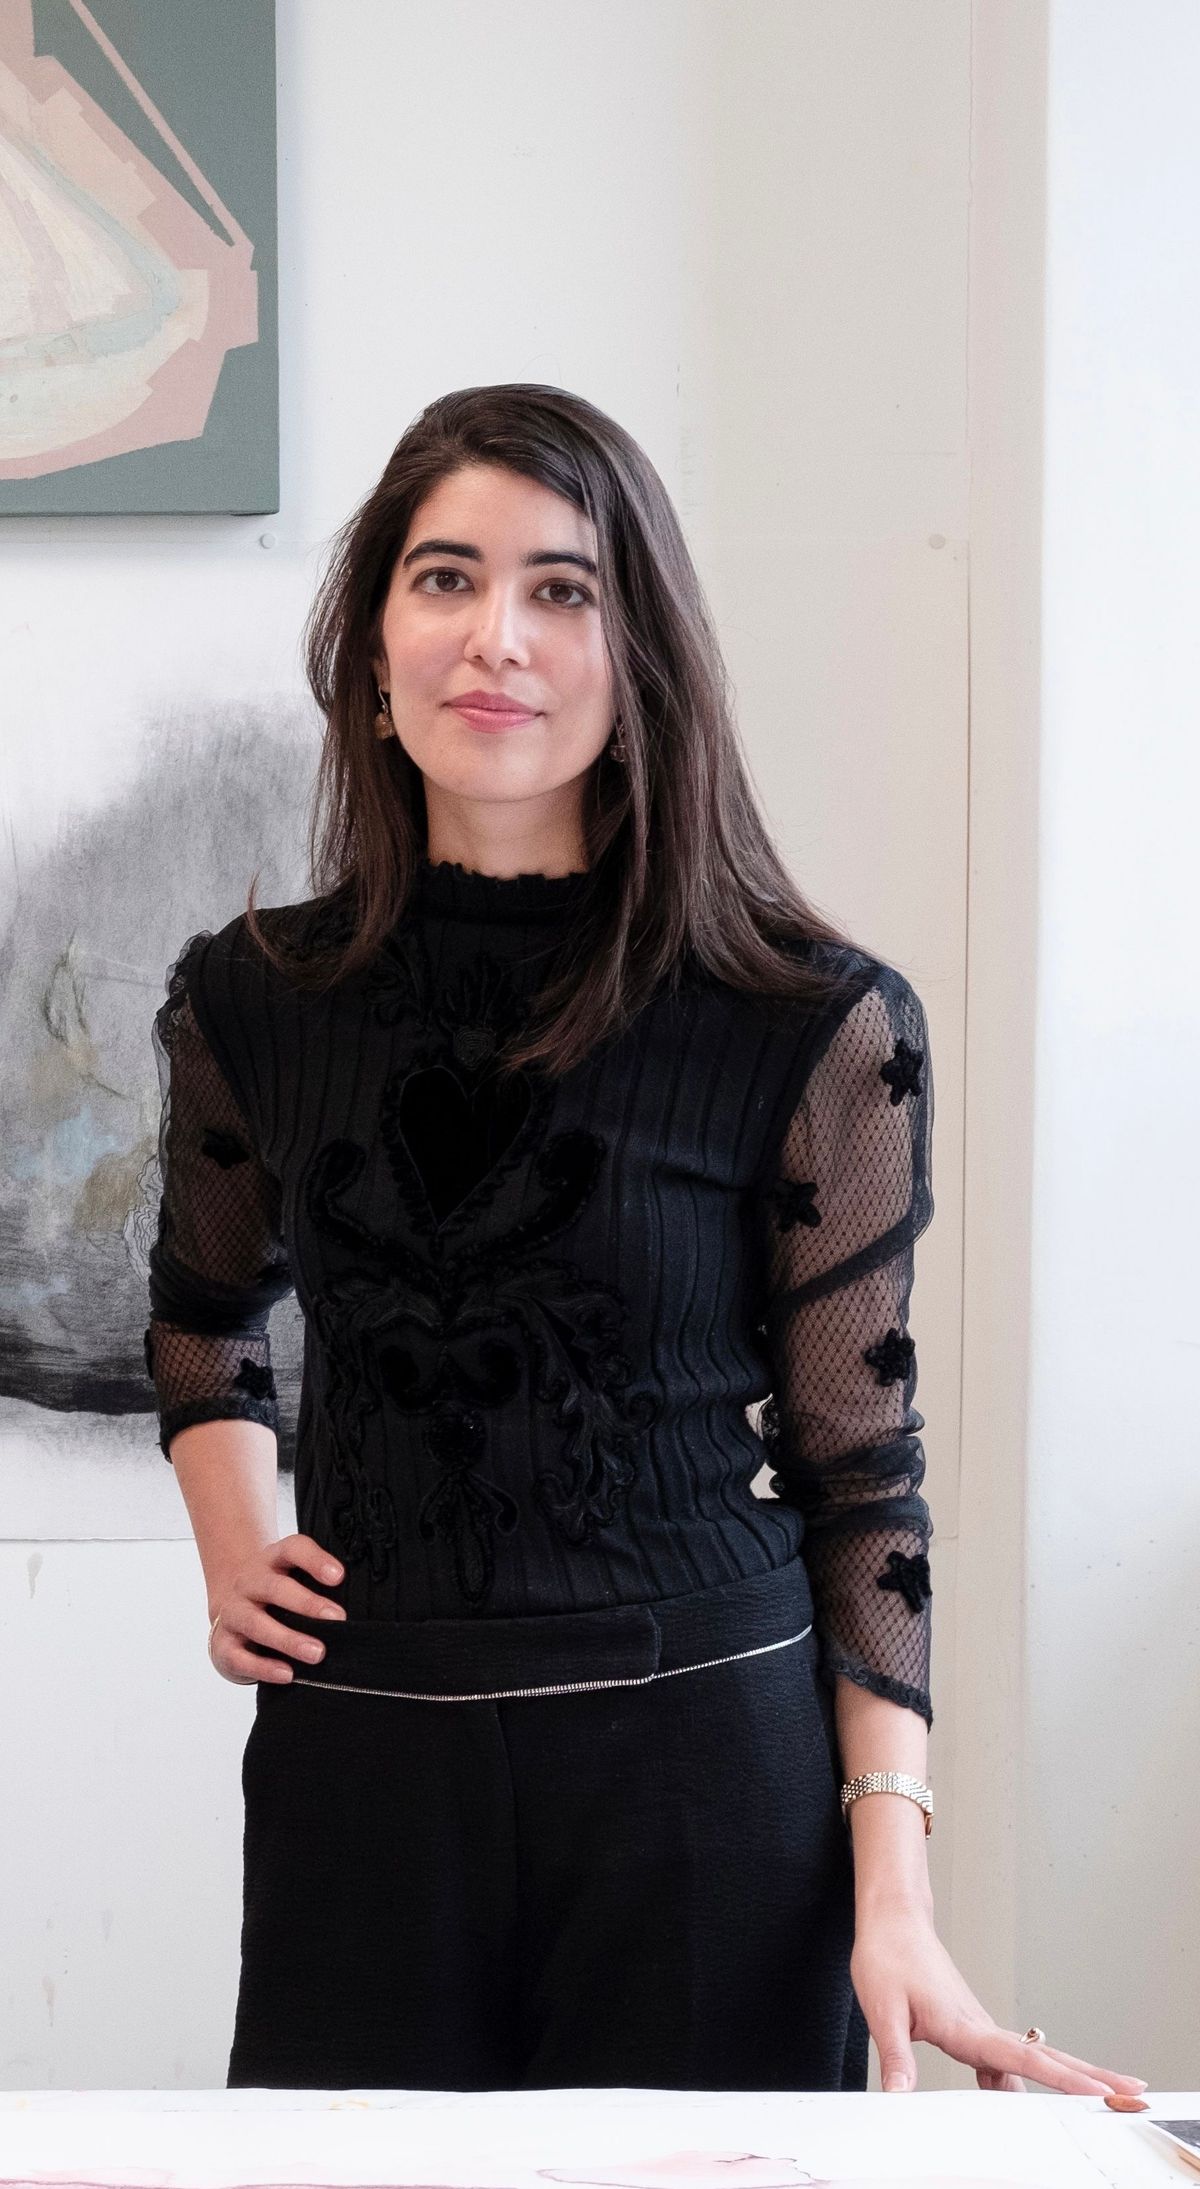 The curator of Pakistan's first—and only—Venice Biennale pavilion ...